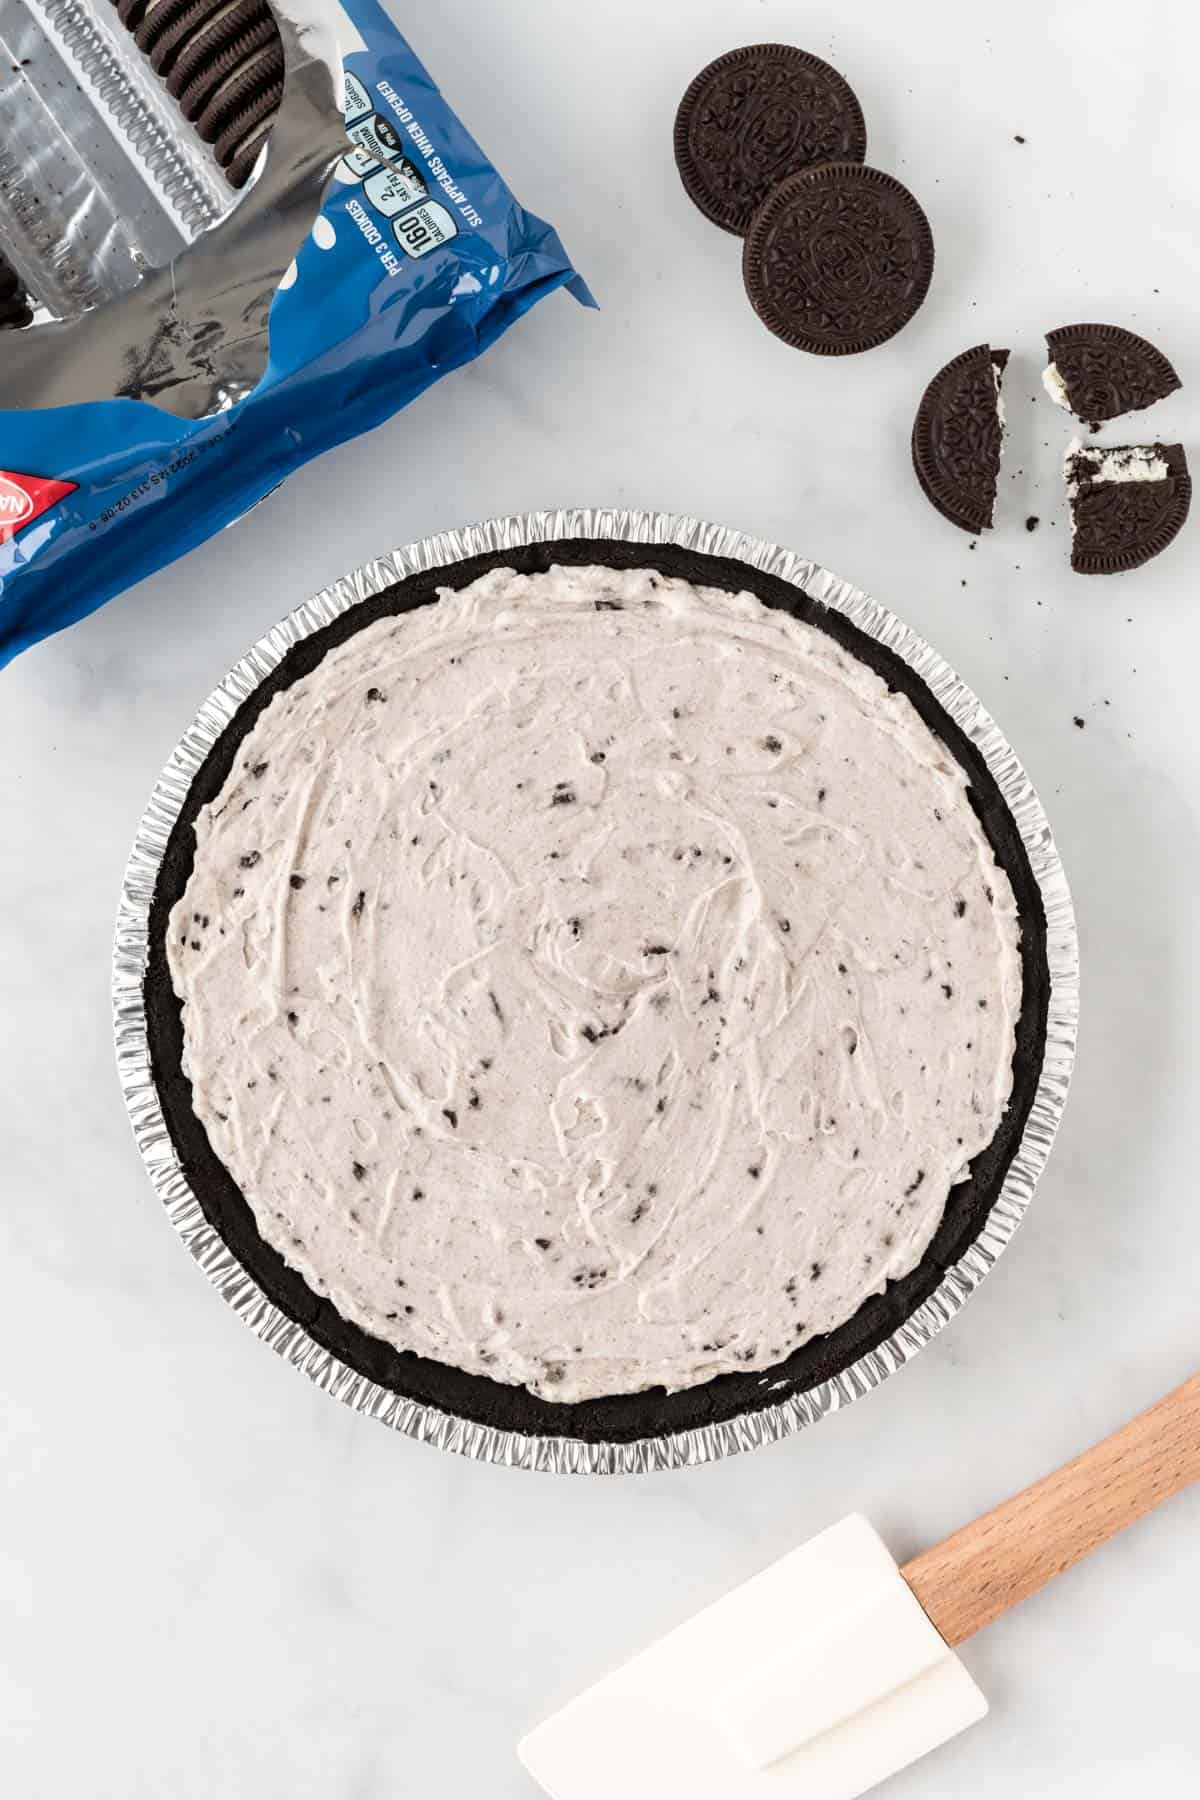 oreo pie filling smoothed out in an oreo pie crust